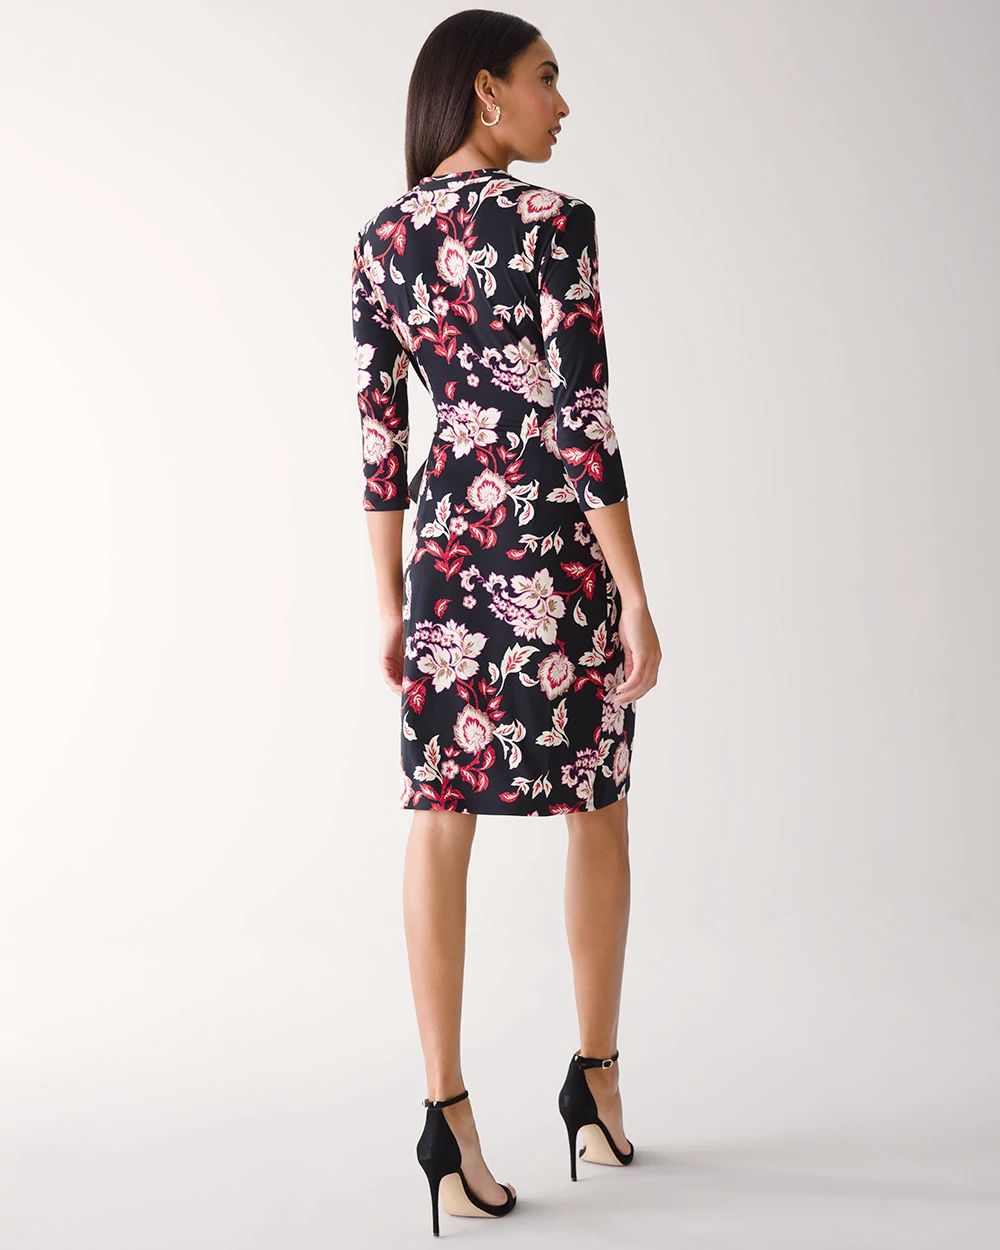 Long-Sleeve Matte Jersey Wrap Dress click to view larger image.